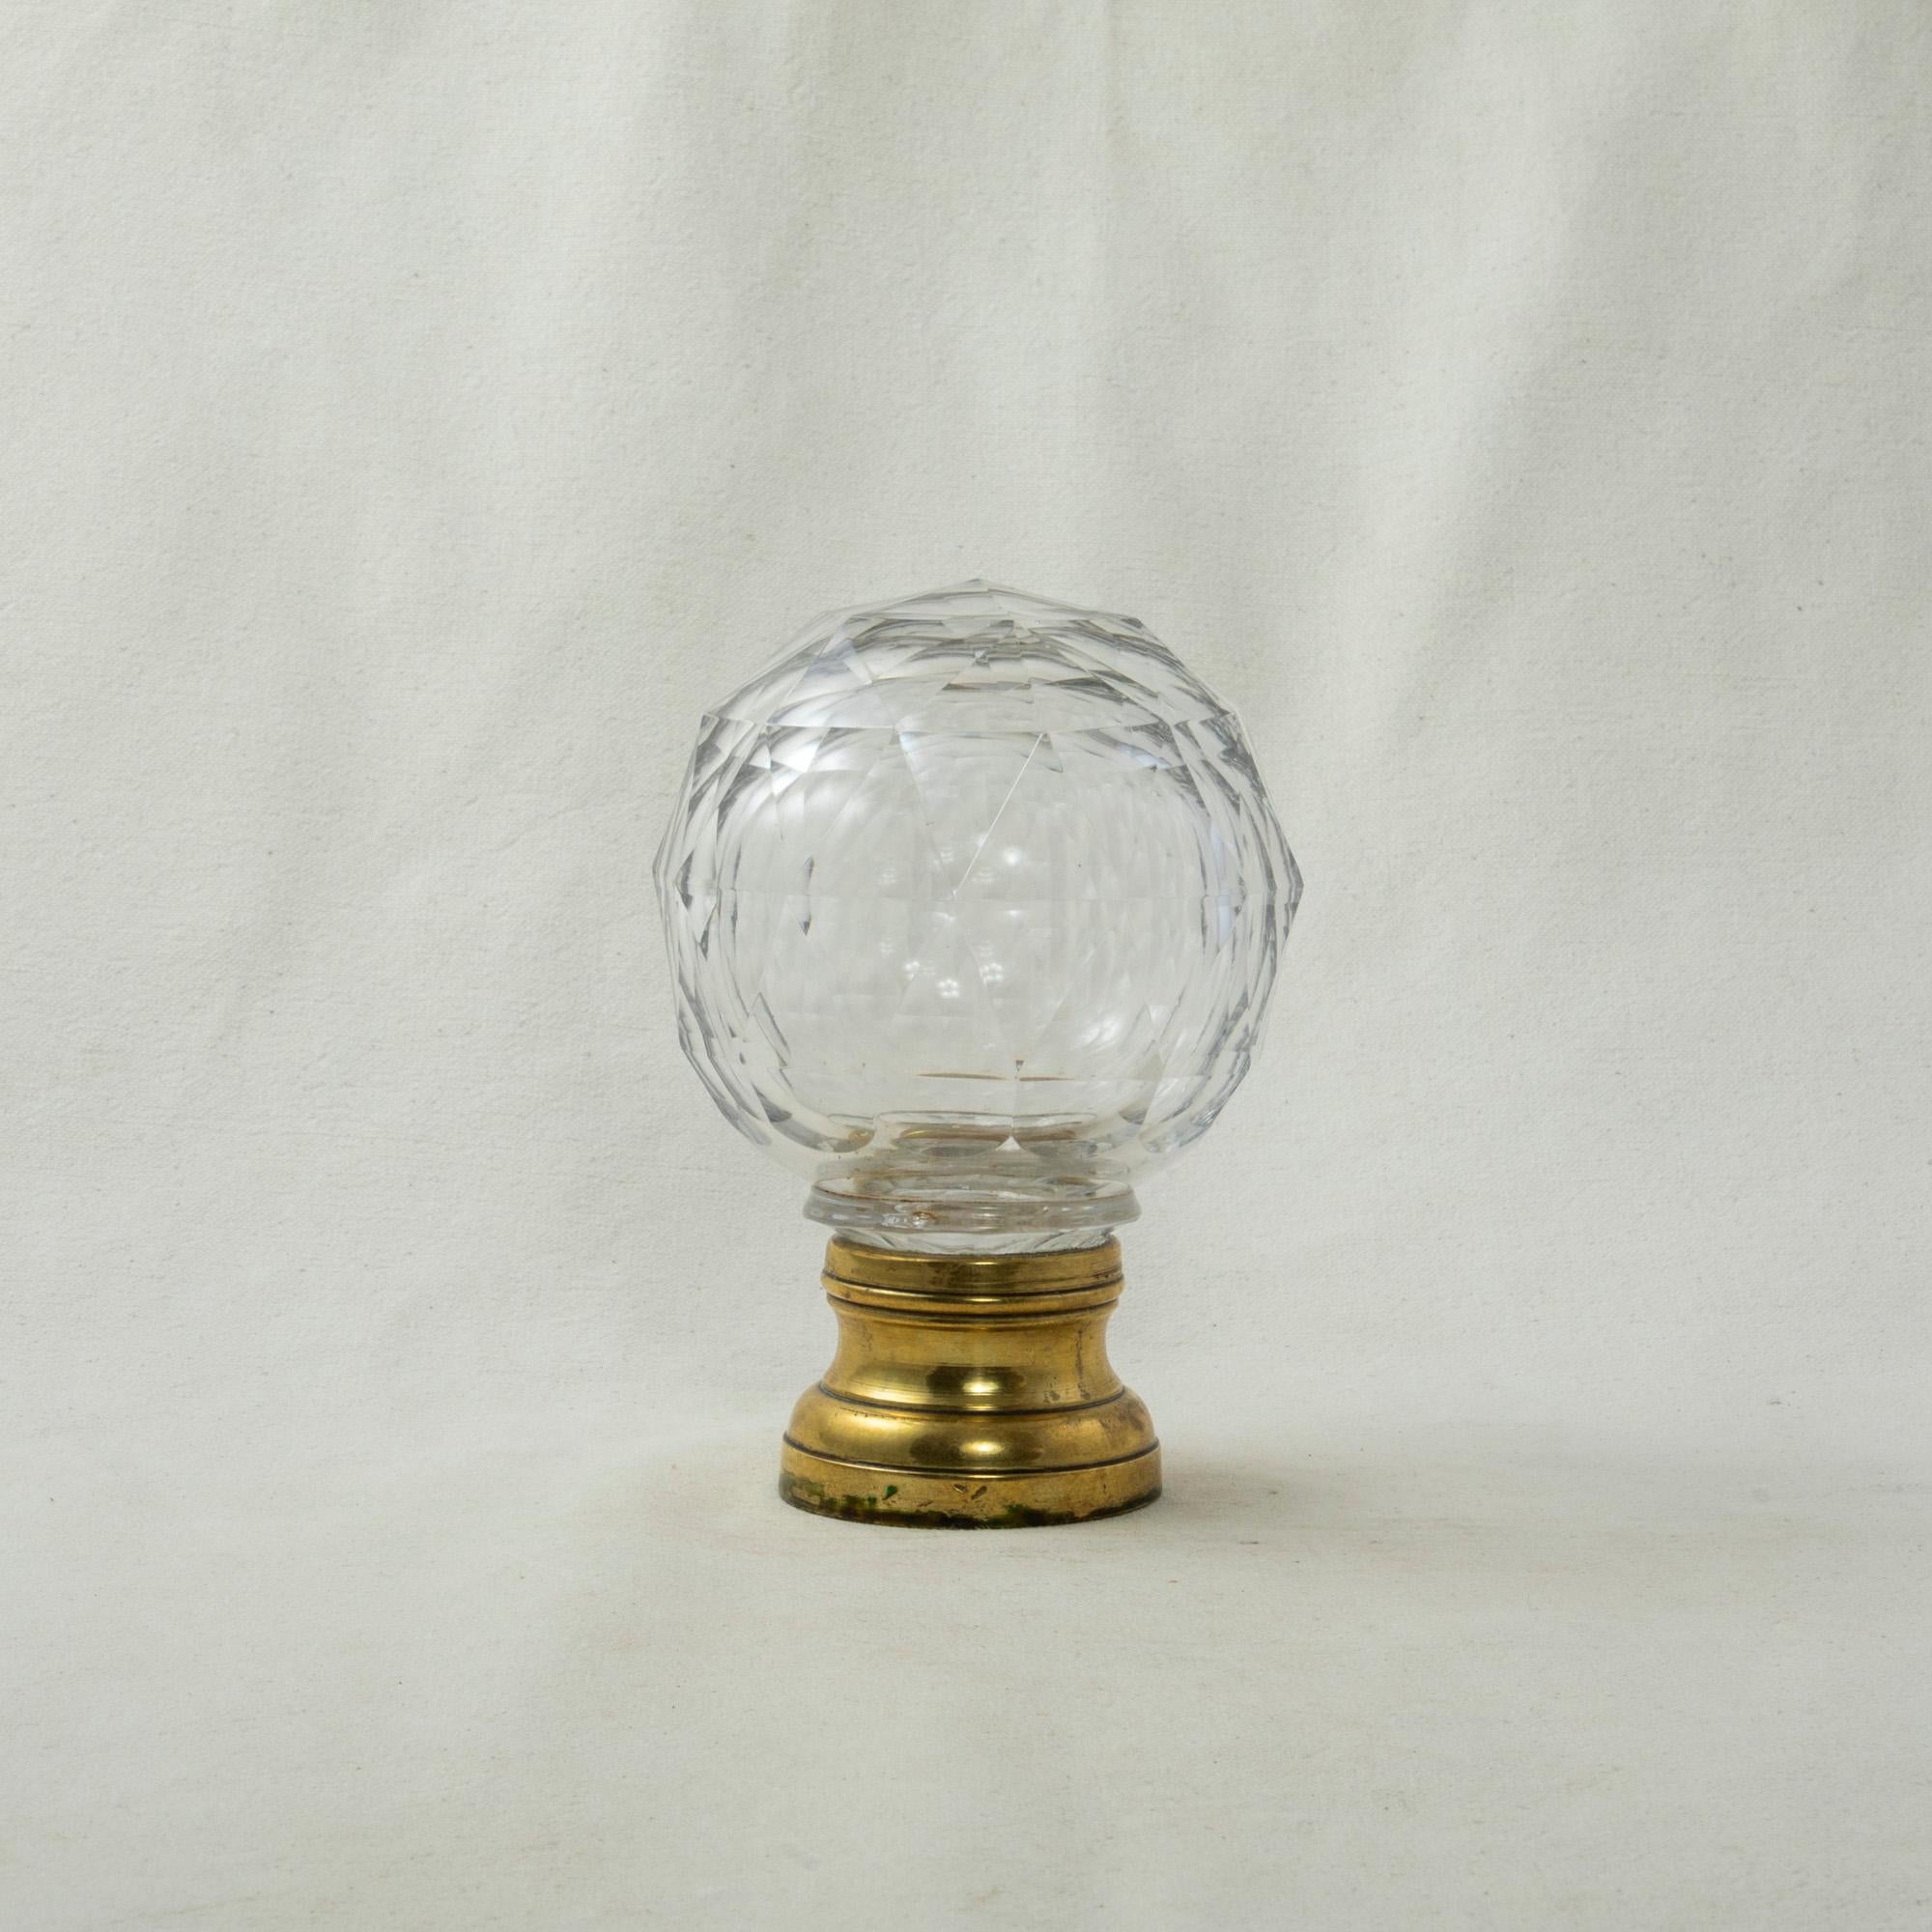 This very large early twentieth century French Art Deco period staircase finial features a multifaceted crystal ball mounted on a brass base. The base is threaded to screw onto a staircase banister for secure attachment. Standing at 5.5 inches in